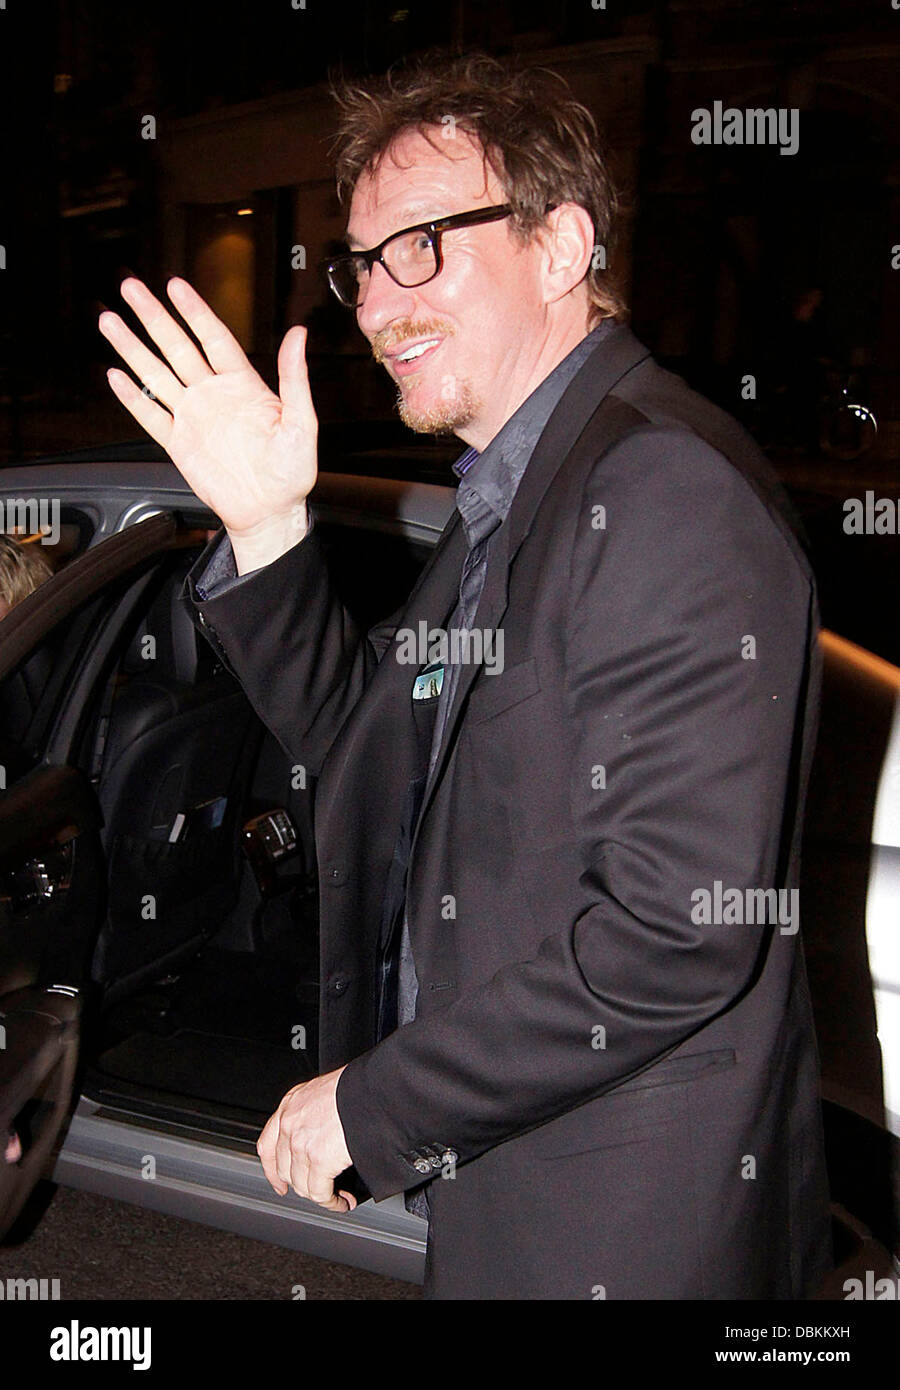 David Thewlis Harry Potter And The Deathly Hallows: Part 2 - World Film Premiere - Afterparty at Old Billingsgate Market London, England - 07.07.11 Stock Photo